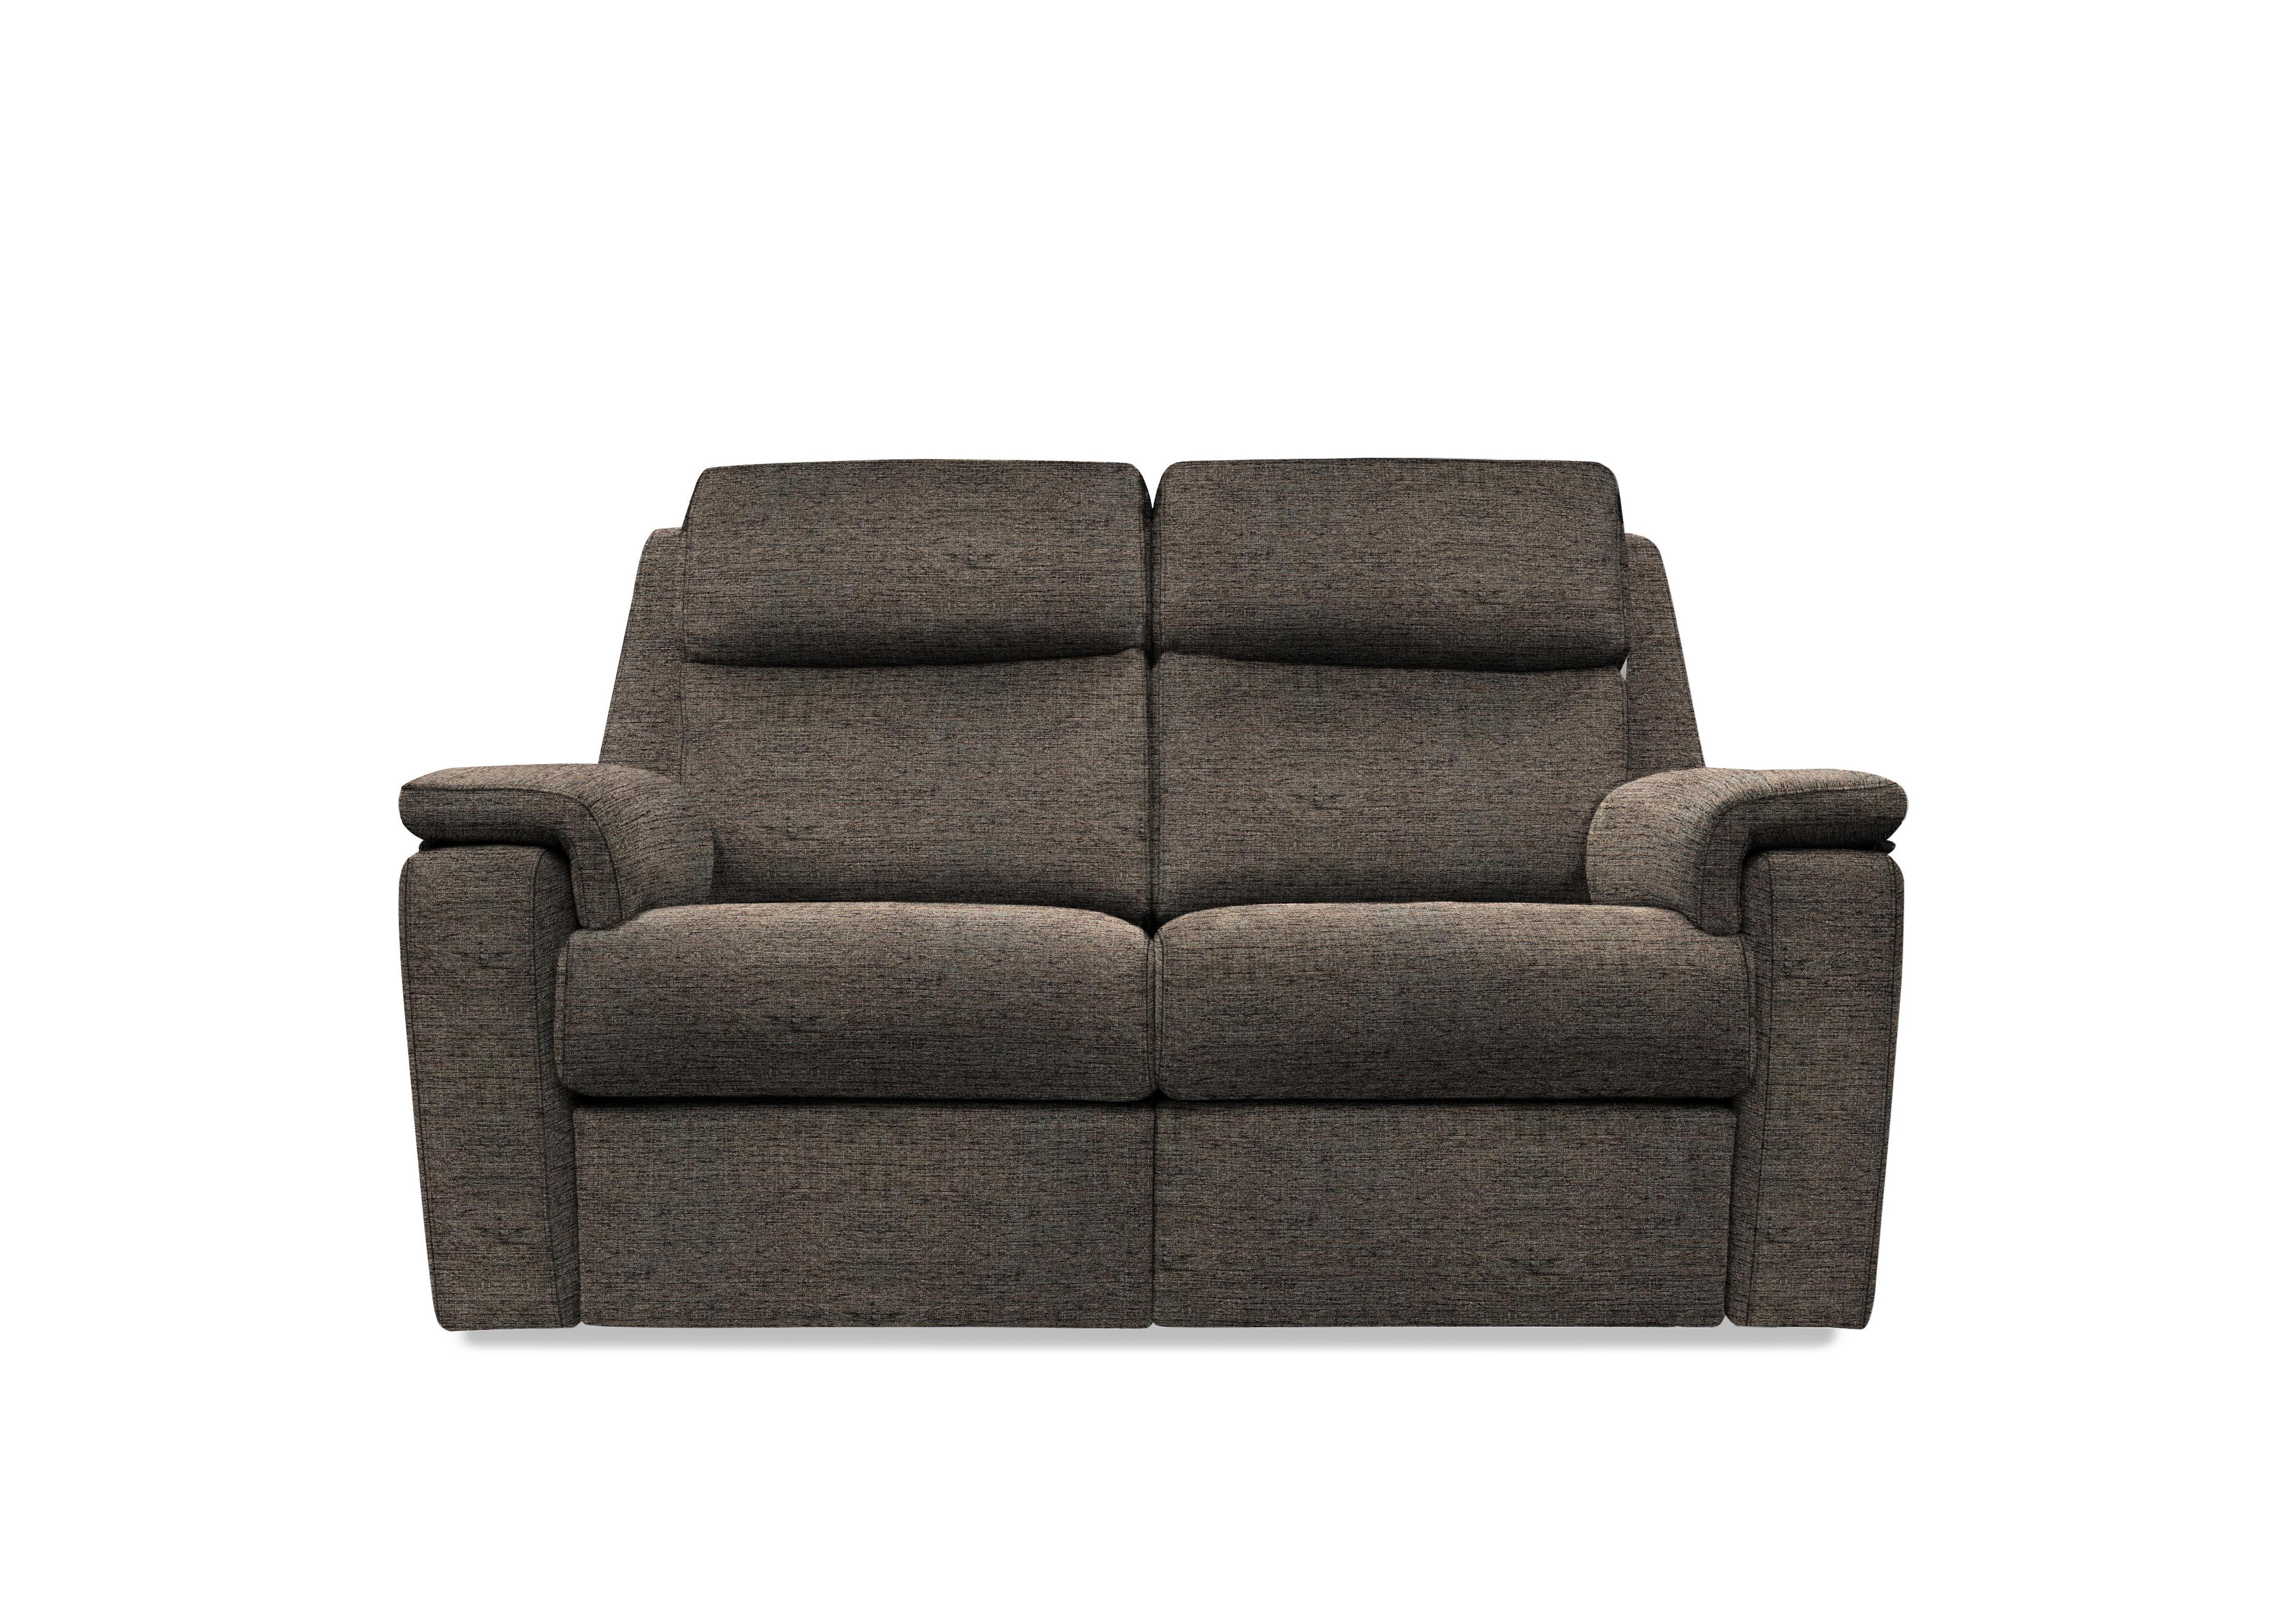 Thornbury 2 Seater Fabric Power Recliner Sofa with Power Headrests and Power Lumbar in A008 Yarn Slate on Furniture Village